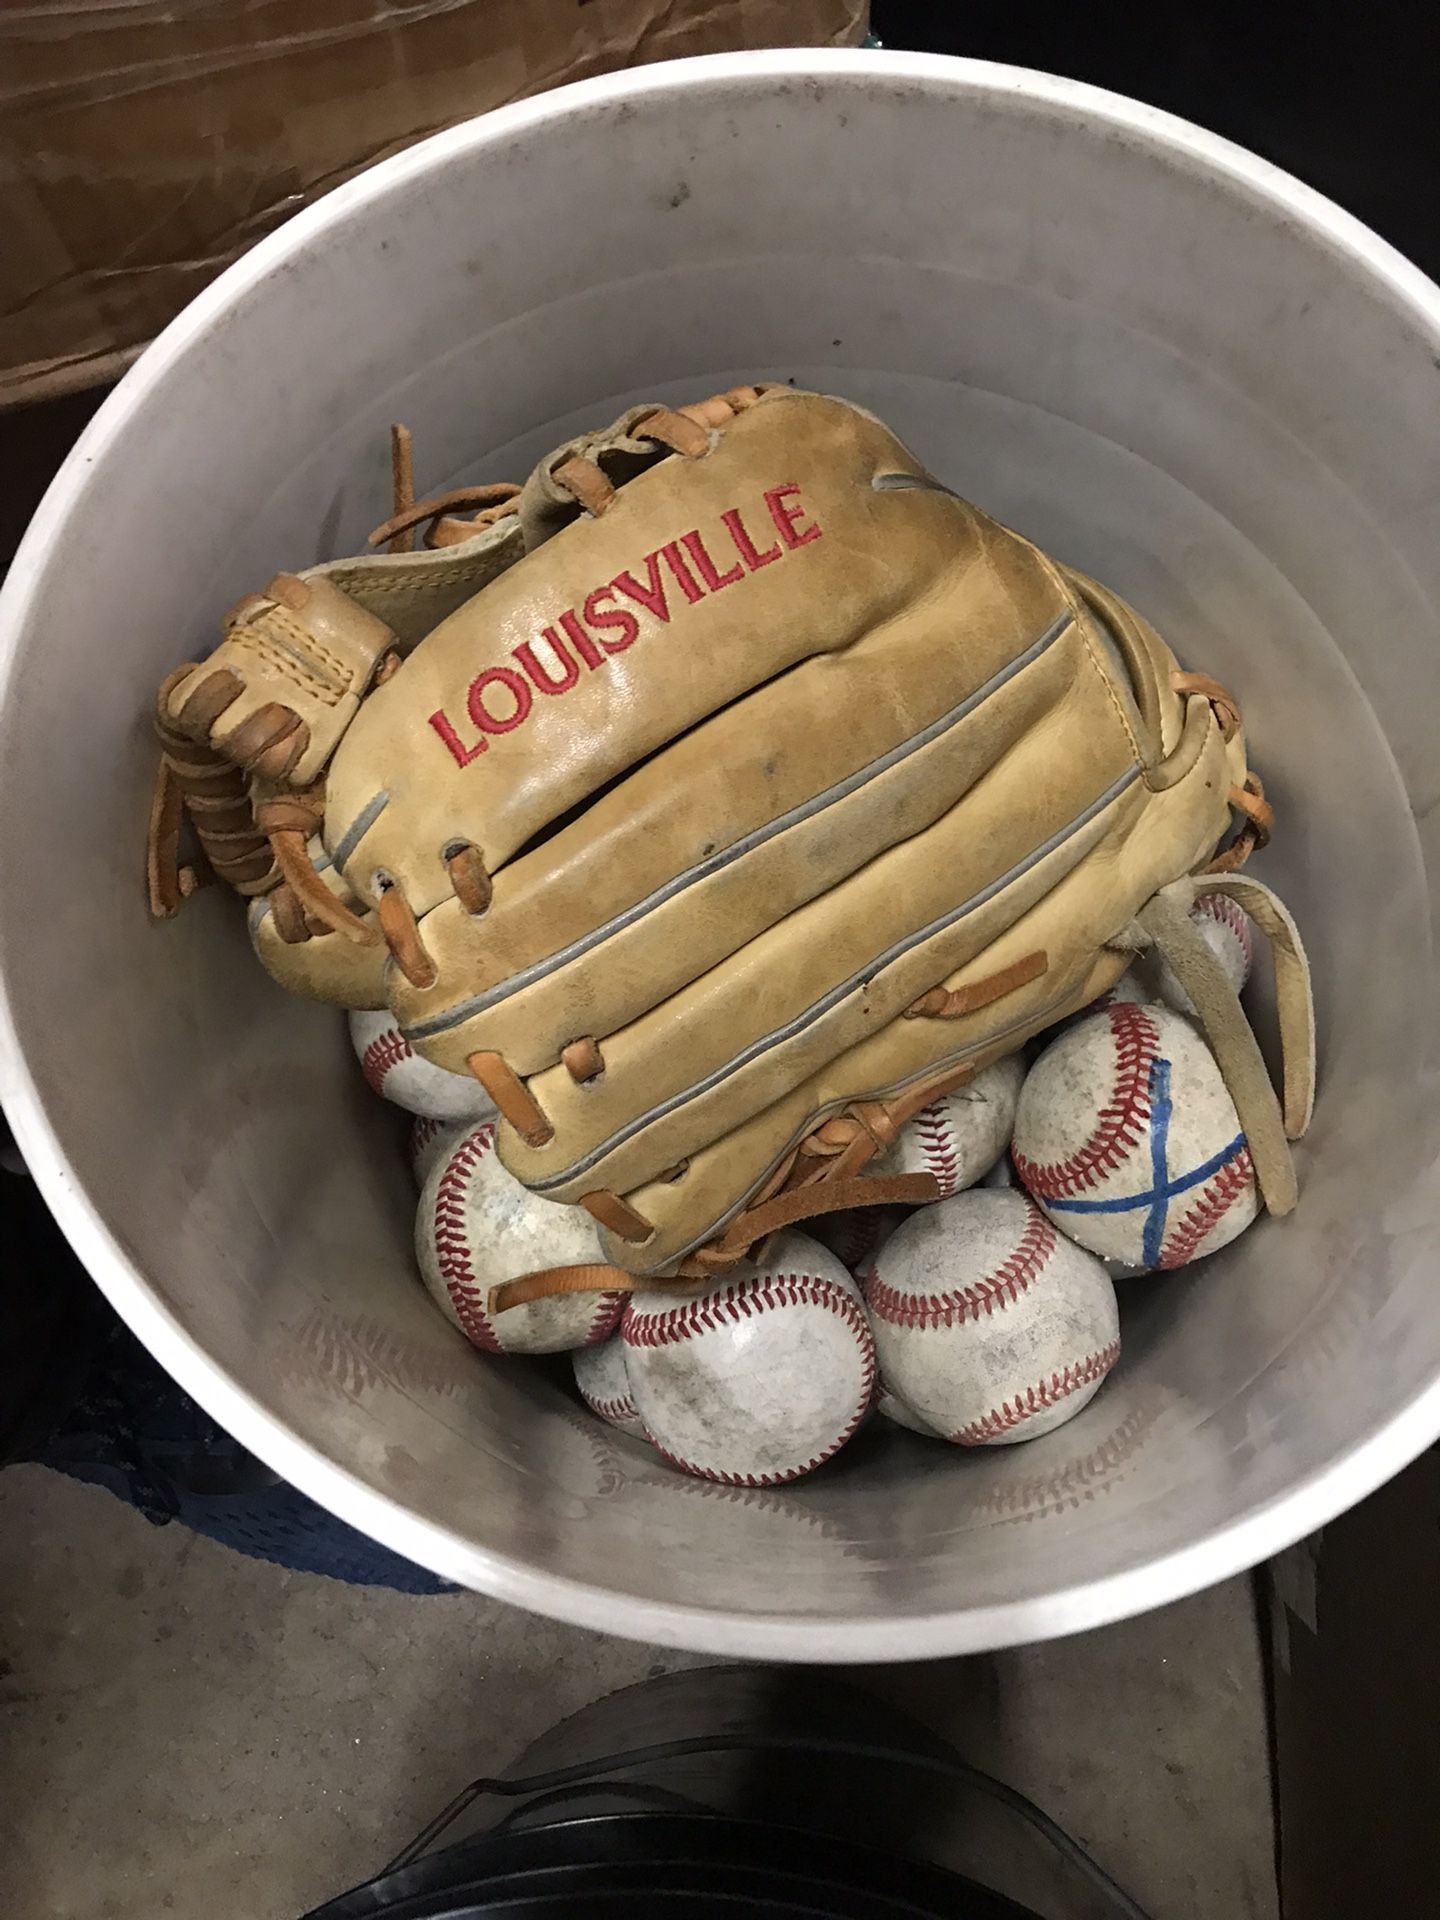 Baseballs ⚾️ $2 Bats new and used $15-$95 Gloves $15 Helmets $5- $30 Bags $10